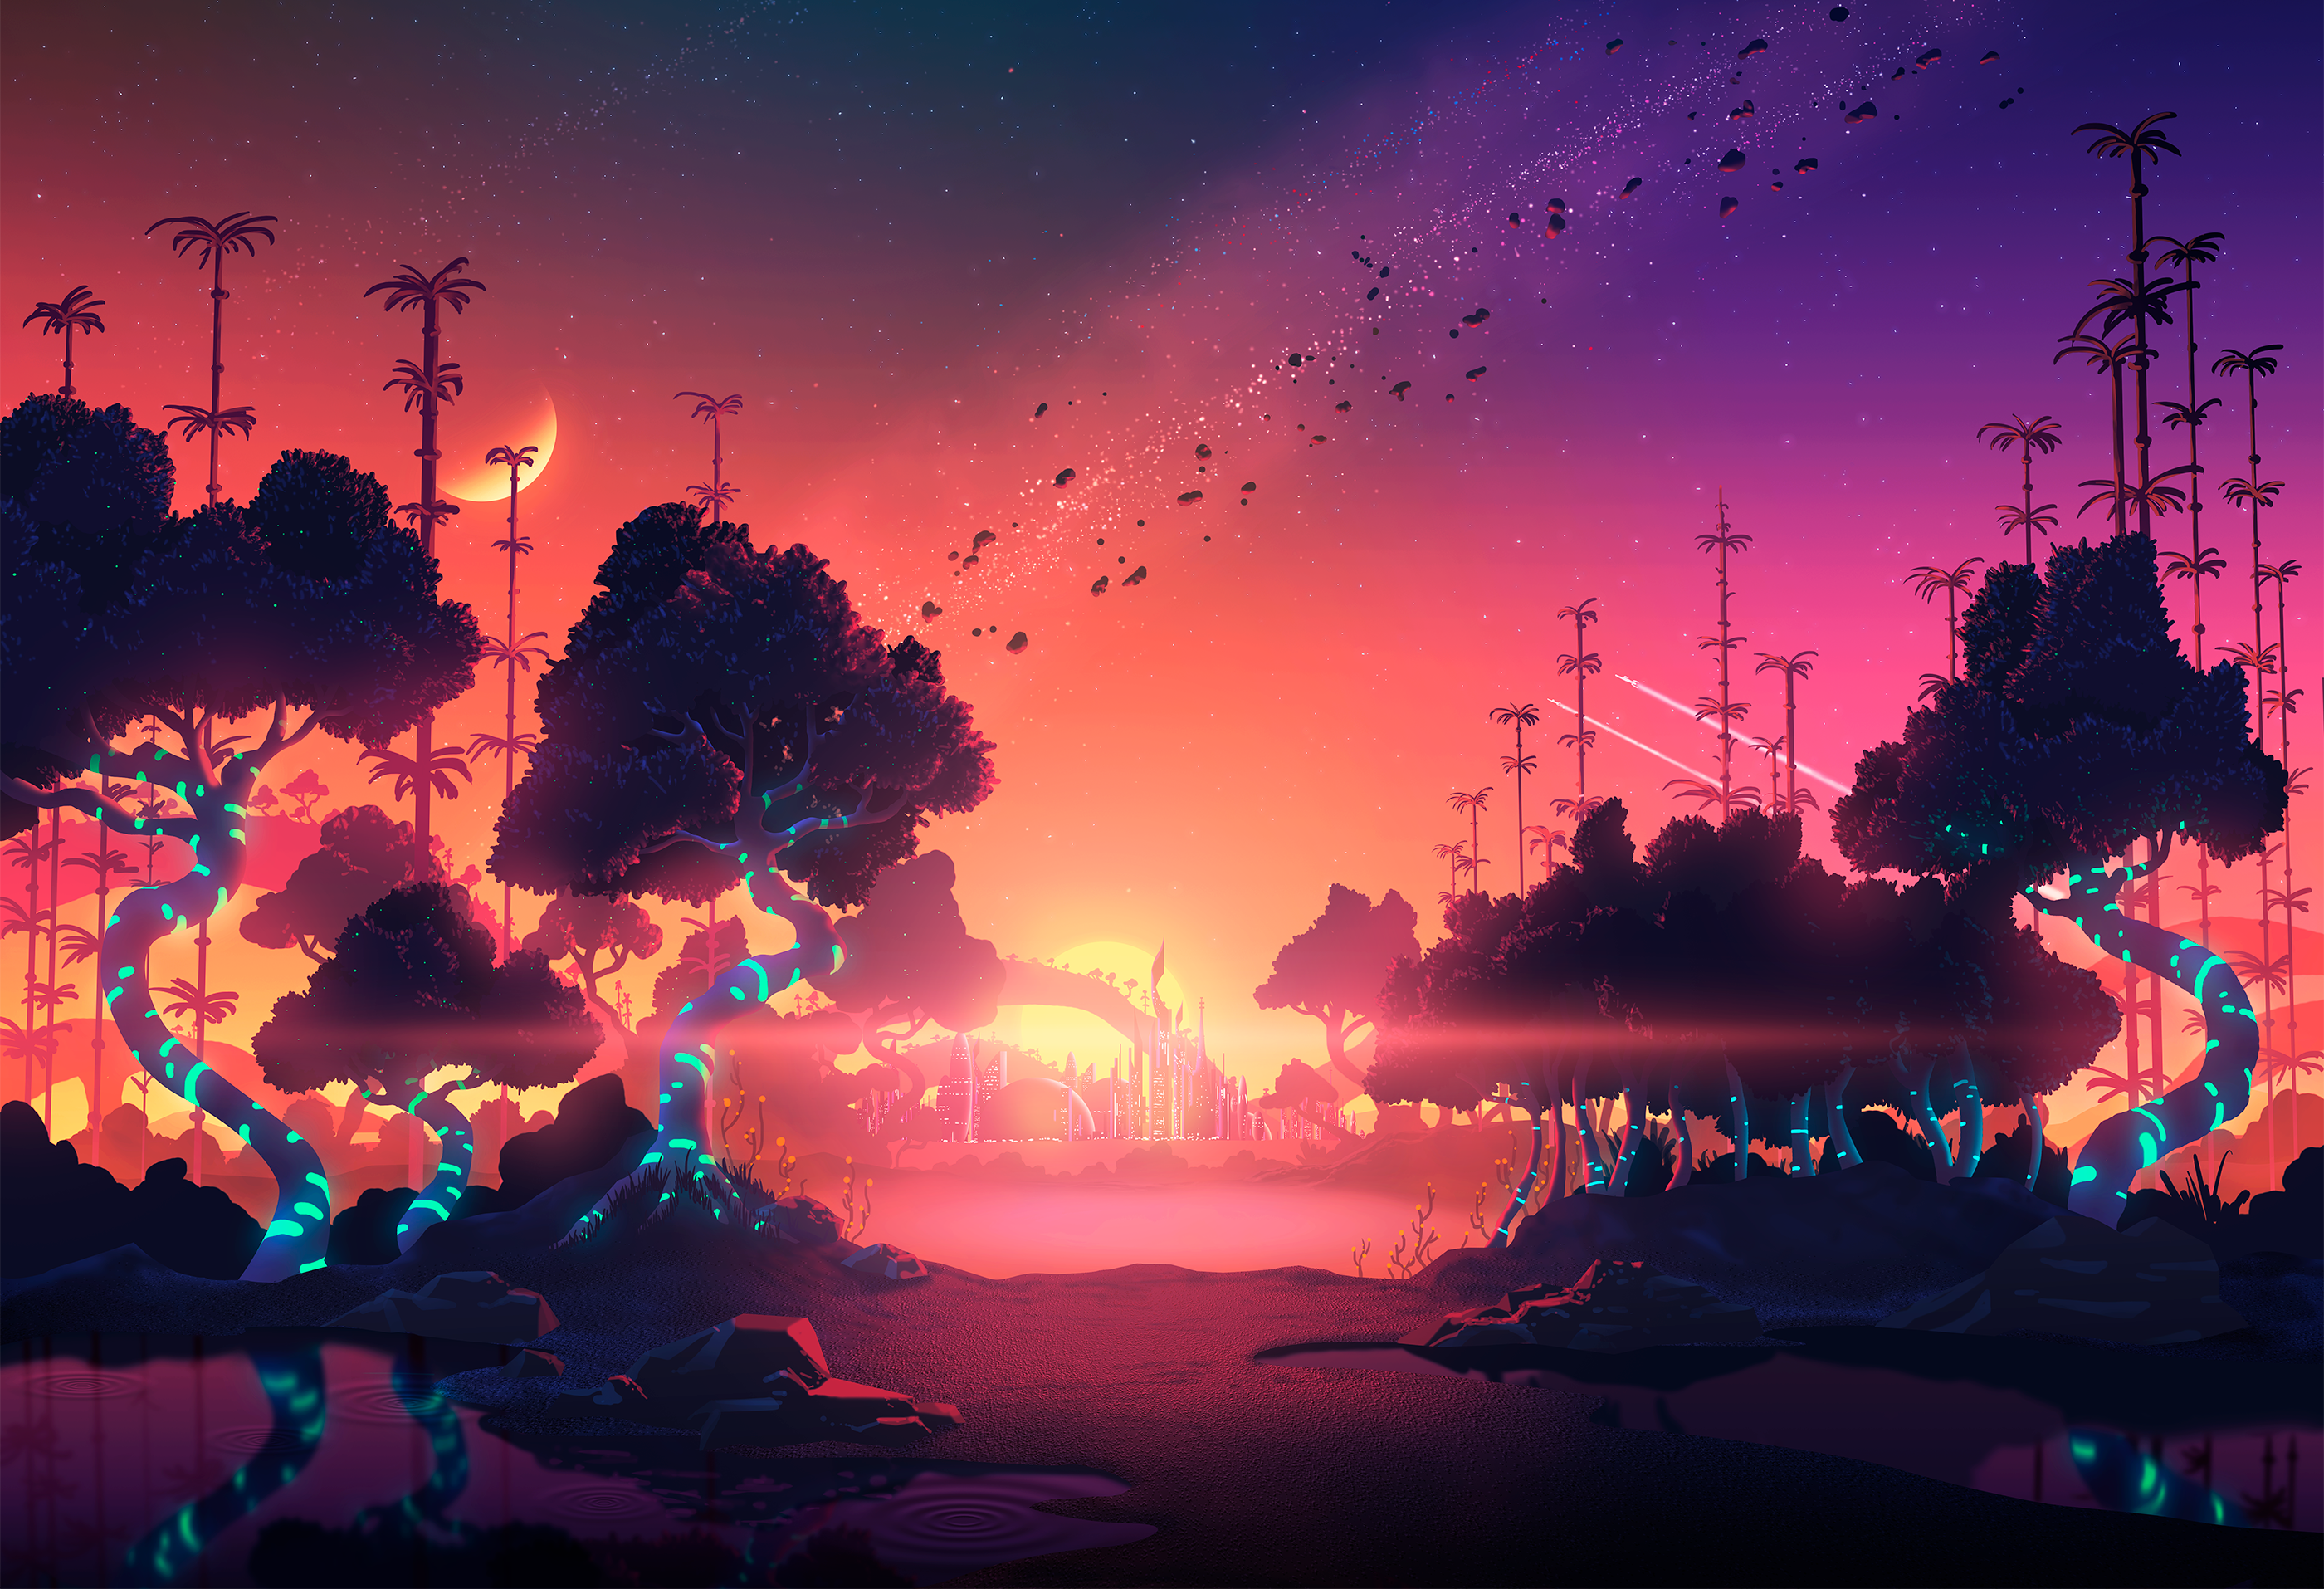 General 2800x1914 Aaron Campbell digital art sunset trees Moon planes stars science fiction